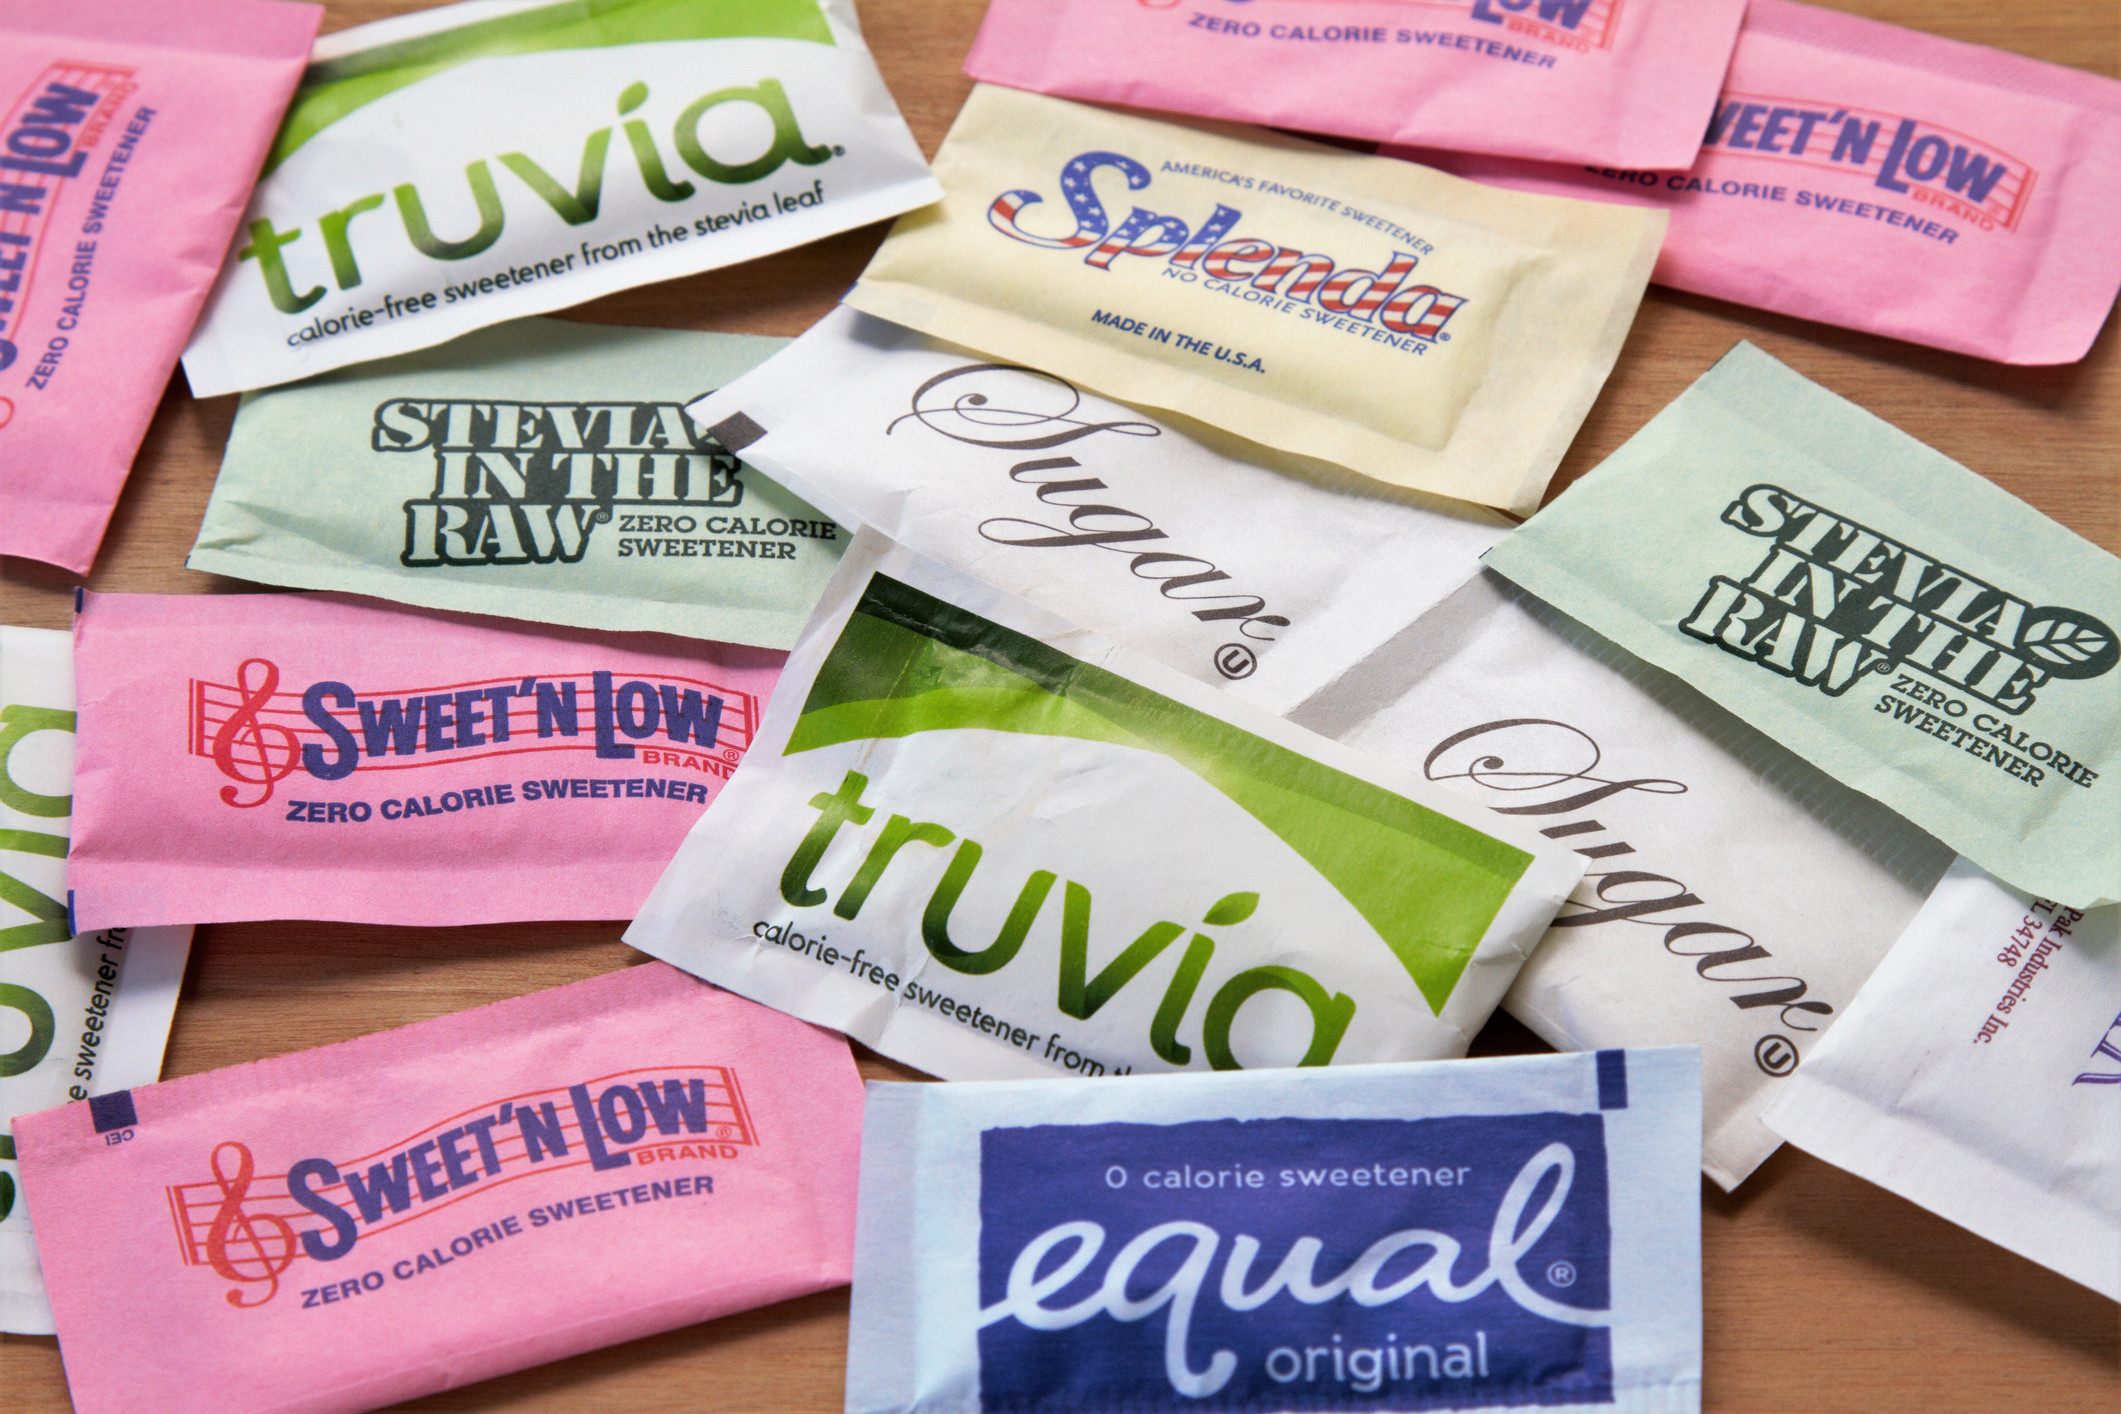 Foods that contain artificial sweeteners